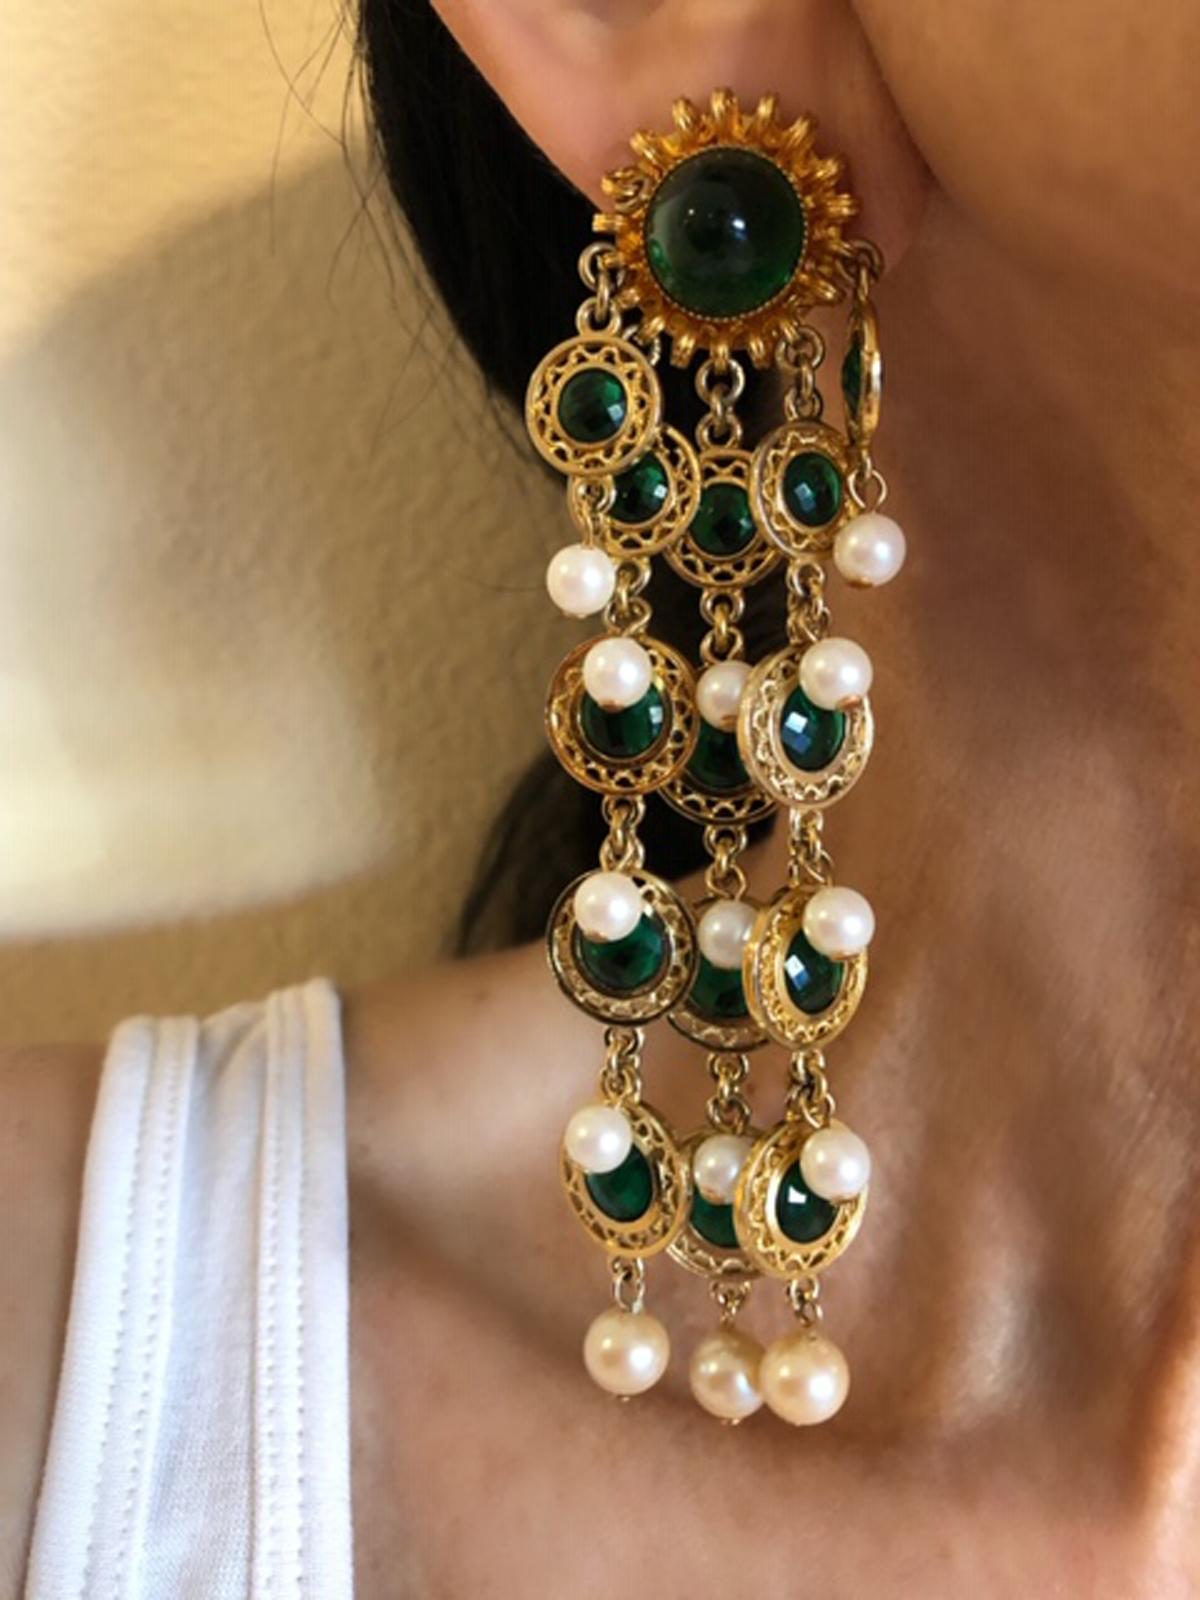 Beautiful pair of faux emerald and pearl earrings by William de Lillo. The statement clip-on earrings are comprised of highly detailed gold-tone circular beads which are accented in the center by faux glass emeralds - the chains and segments are